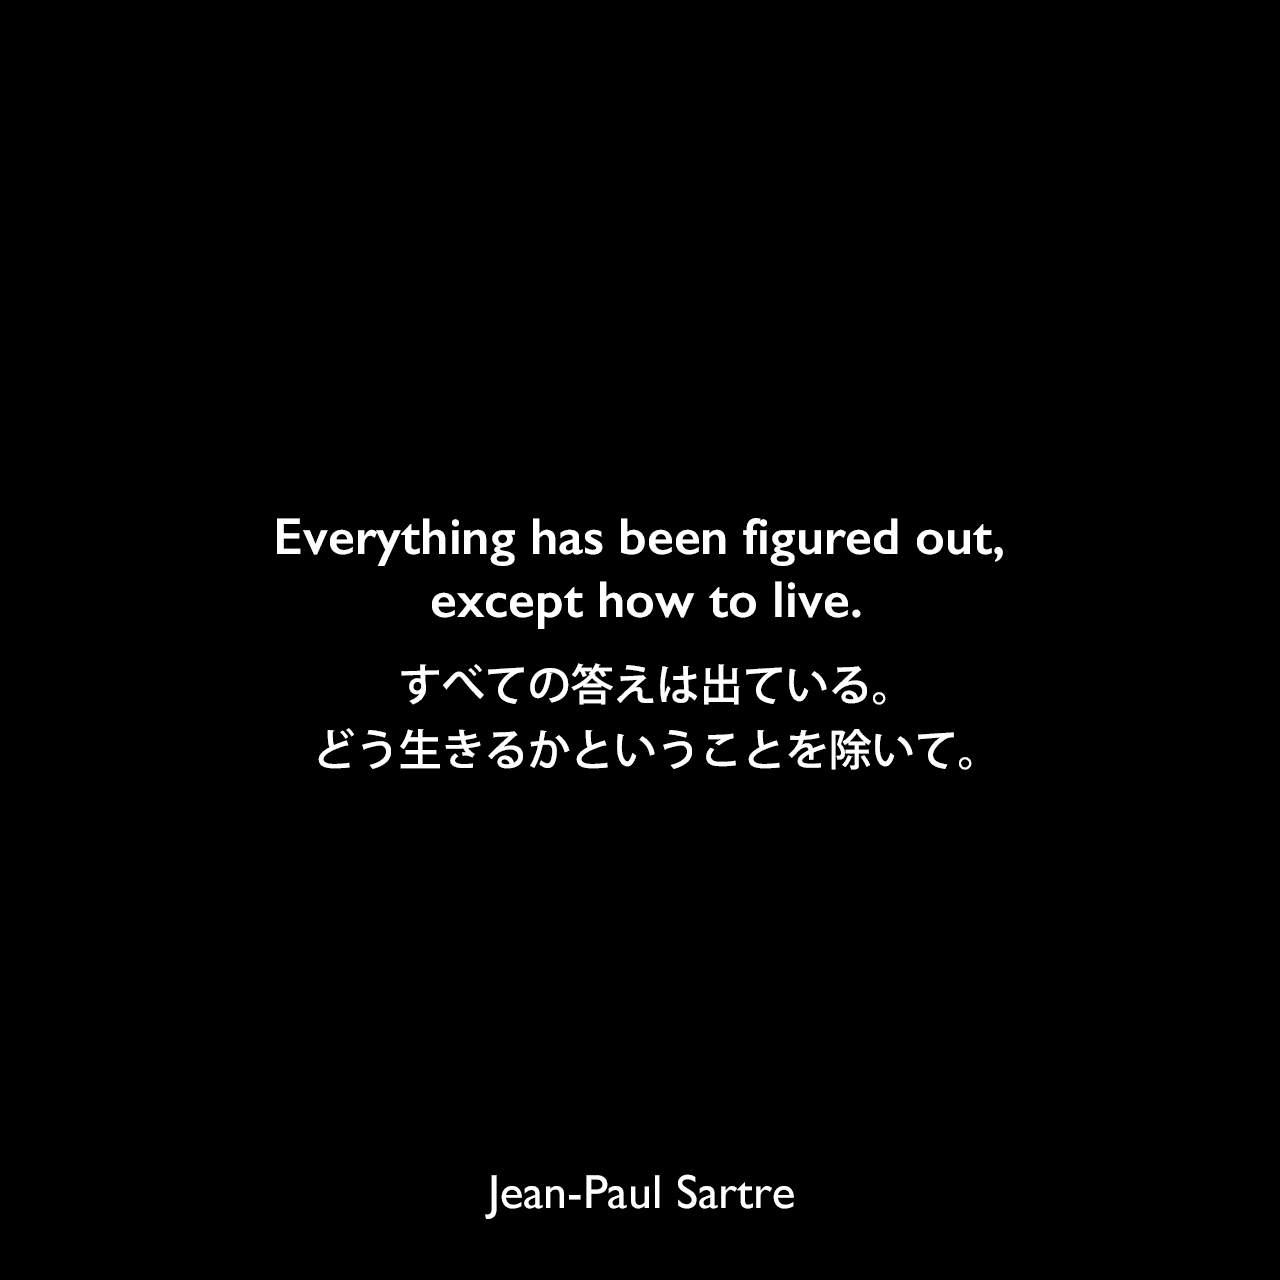 Everything has been figured out, except how to live.すべての答えは出ている。どう生きるかということを除いて。Jean-Paul Sartre